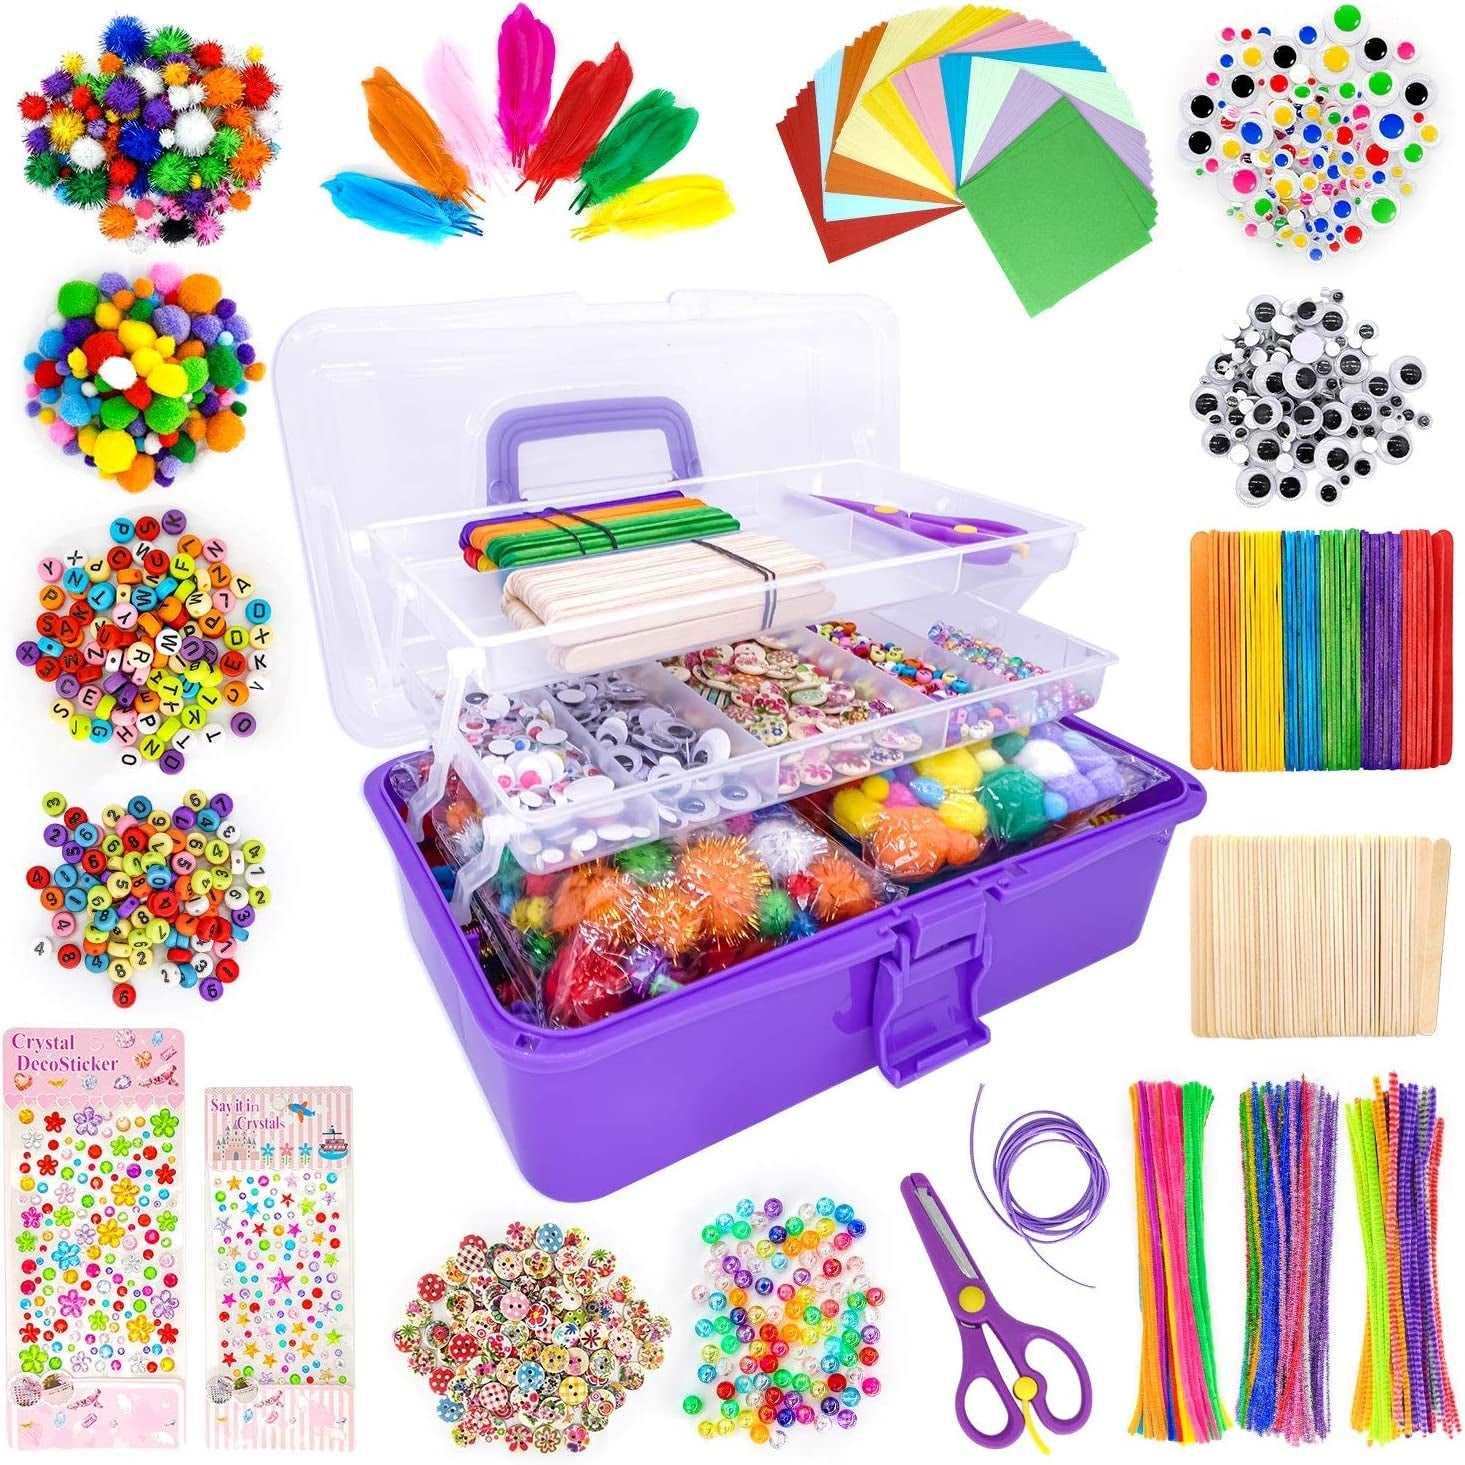 http://woodartsupply.com/cdn/shop/files/1405-pcs-art-and-craft-supplies-for-kids-toddler-diy-craft-art-supply-set-included-pipe-cleaners-pom-poms-feather-woodartsupply-1_ea5b5f13-bd6d-4415-8567-37f6f134ea1e.jpg?v=1696177385